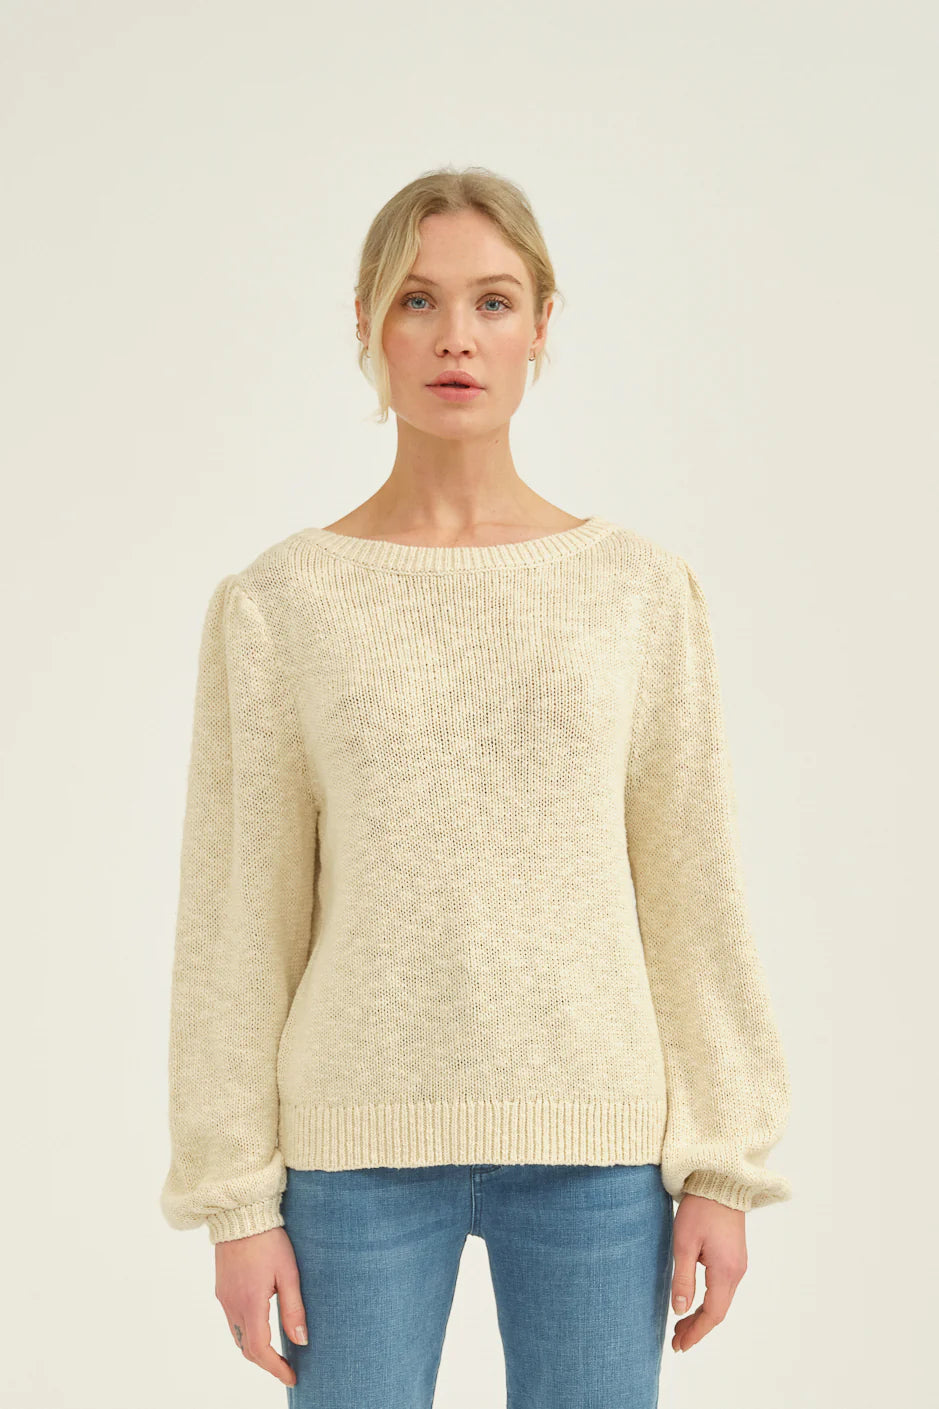 Cream cotton knitted jumper with crew neck and long sleeves with gathered shoulder seam